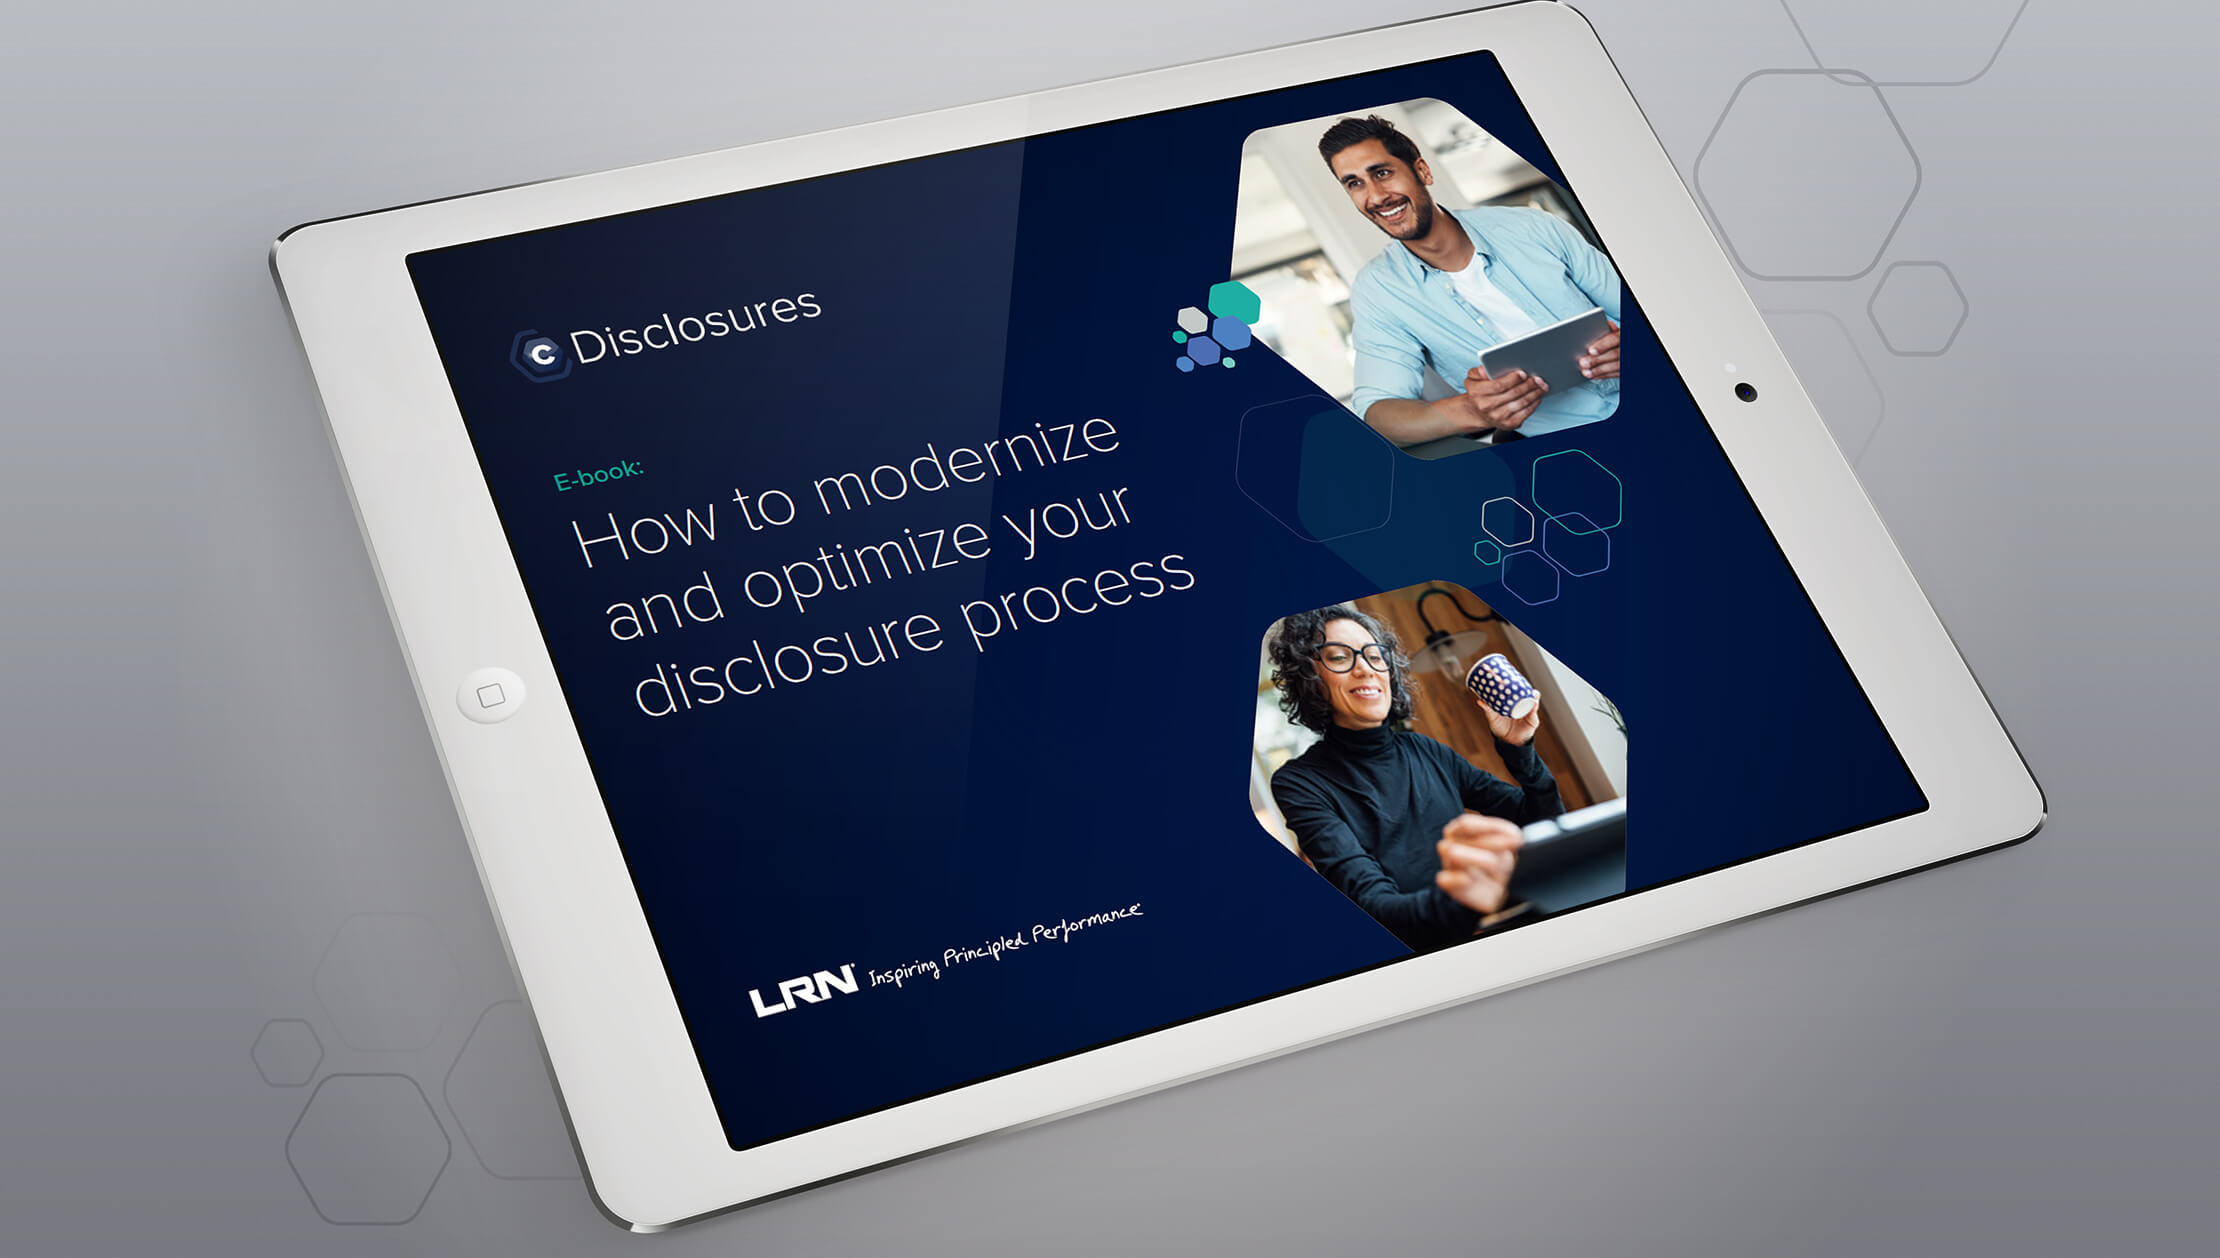 <p>How to modernize and optimize your disclosure process</p>